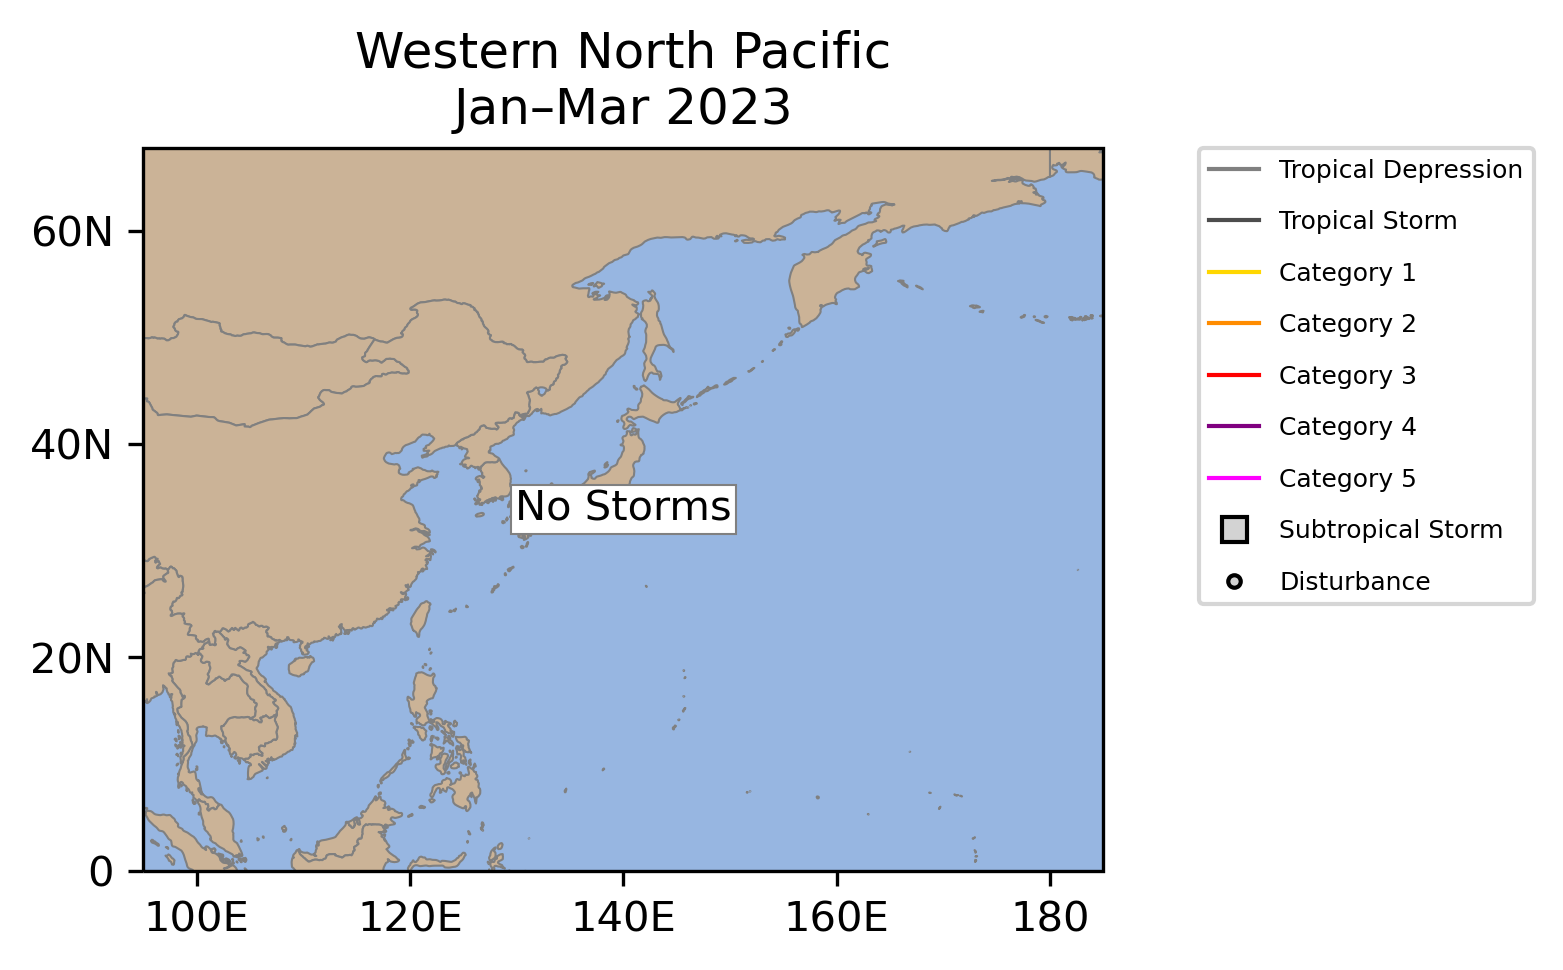 West Pacific Tropical Cyclone Storm Tracks January-March 2023